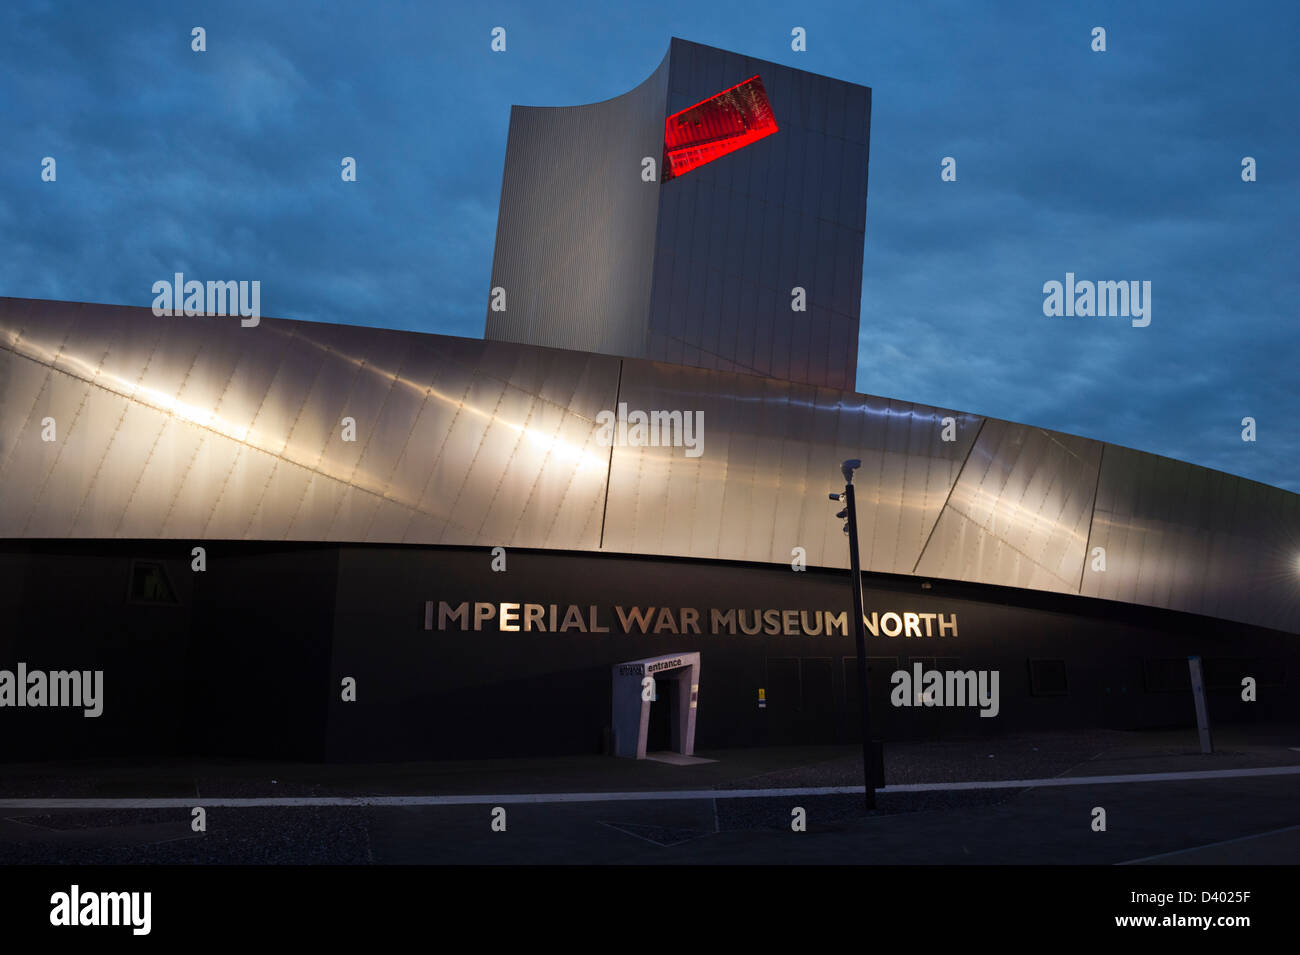 The Imperial War Museum North at Salford Quays, UK, at night. Stock Photo